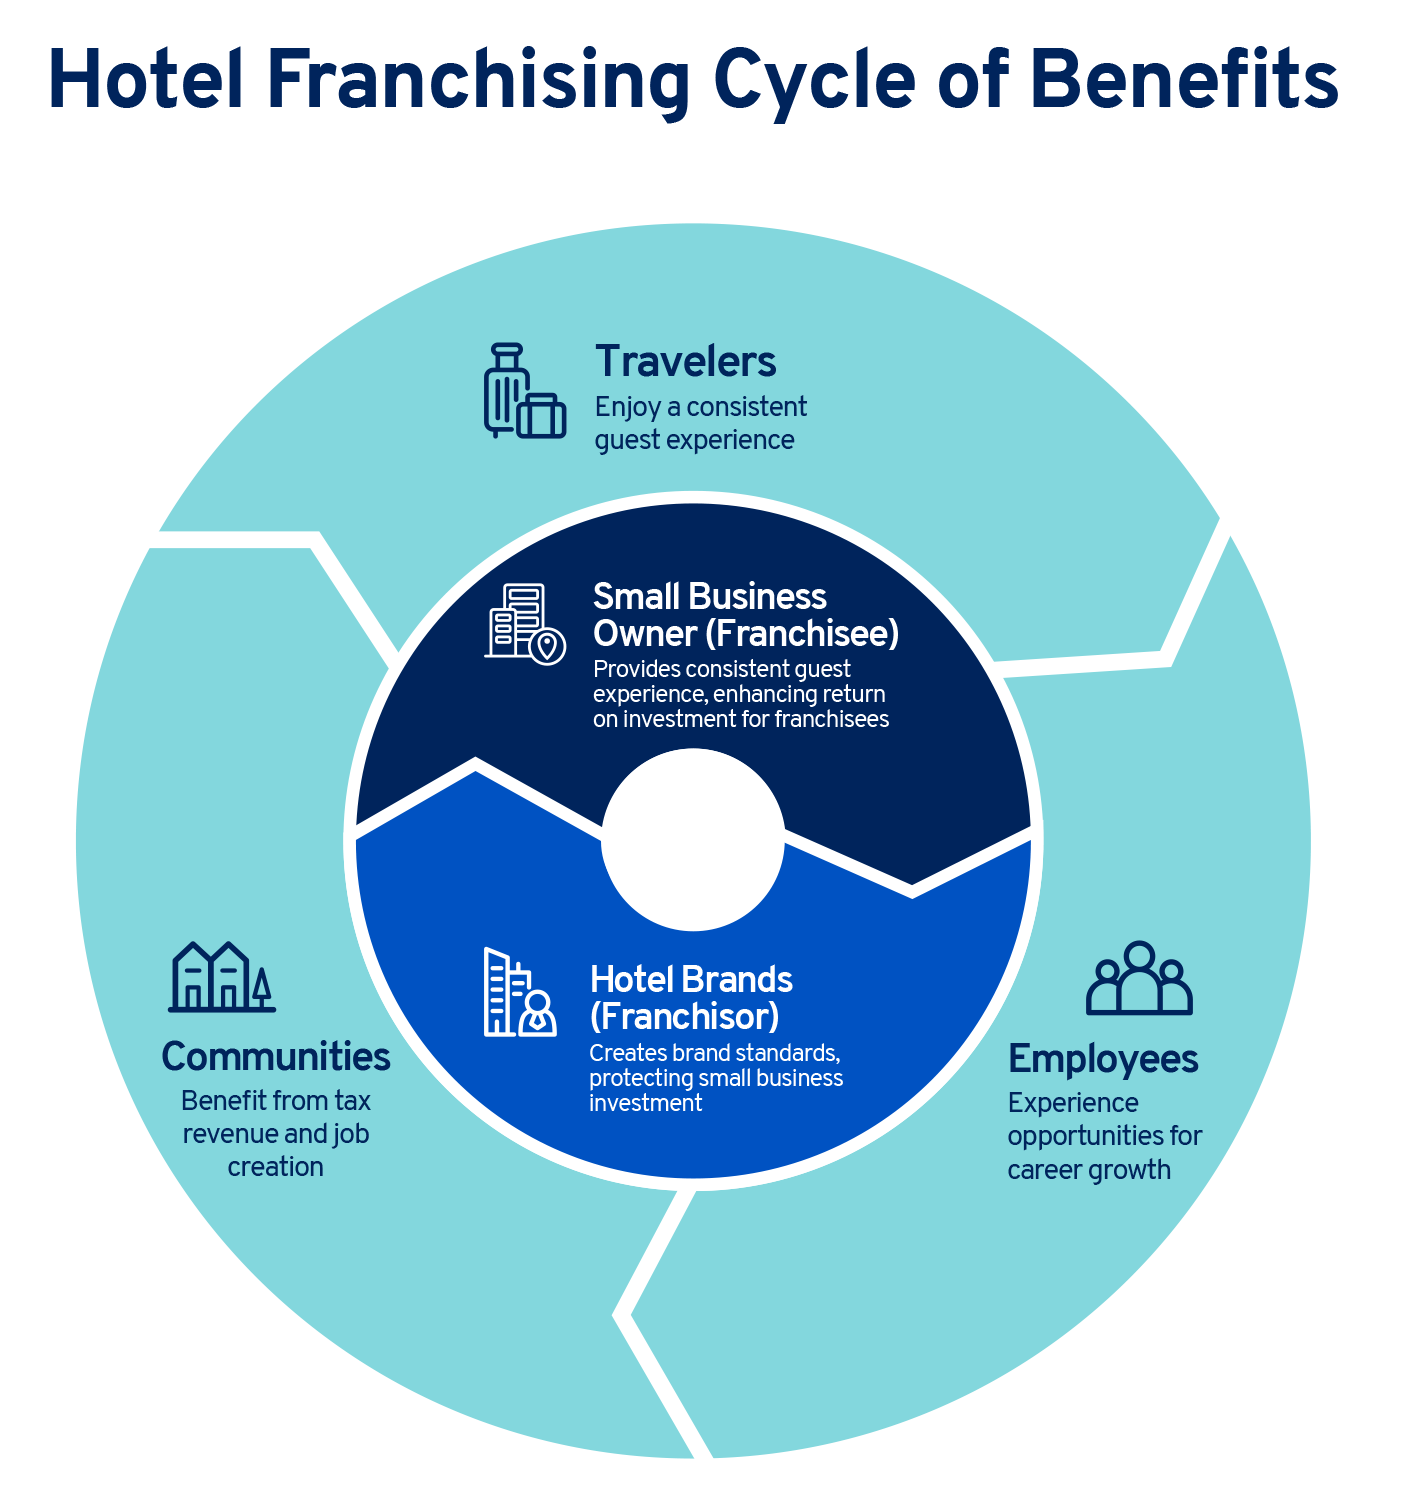 Hotel Franchising Cycle